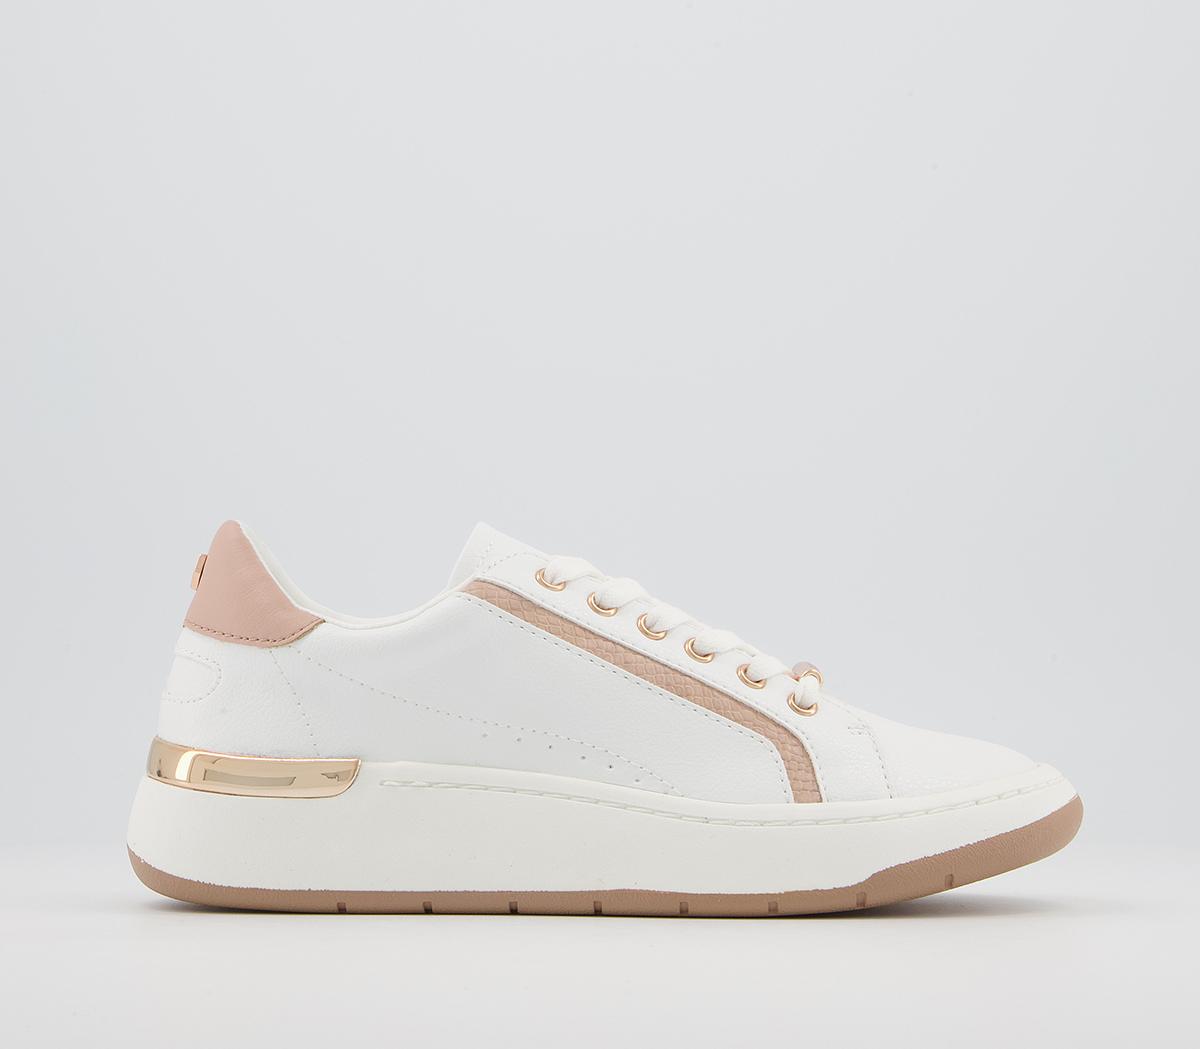 OFFICEForm Feature Sole Lace Up TrainersOff White Nude Mix